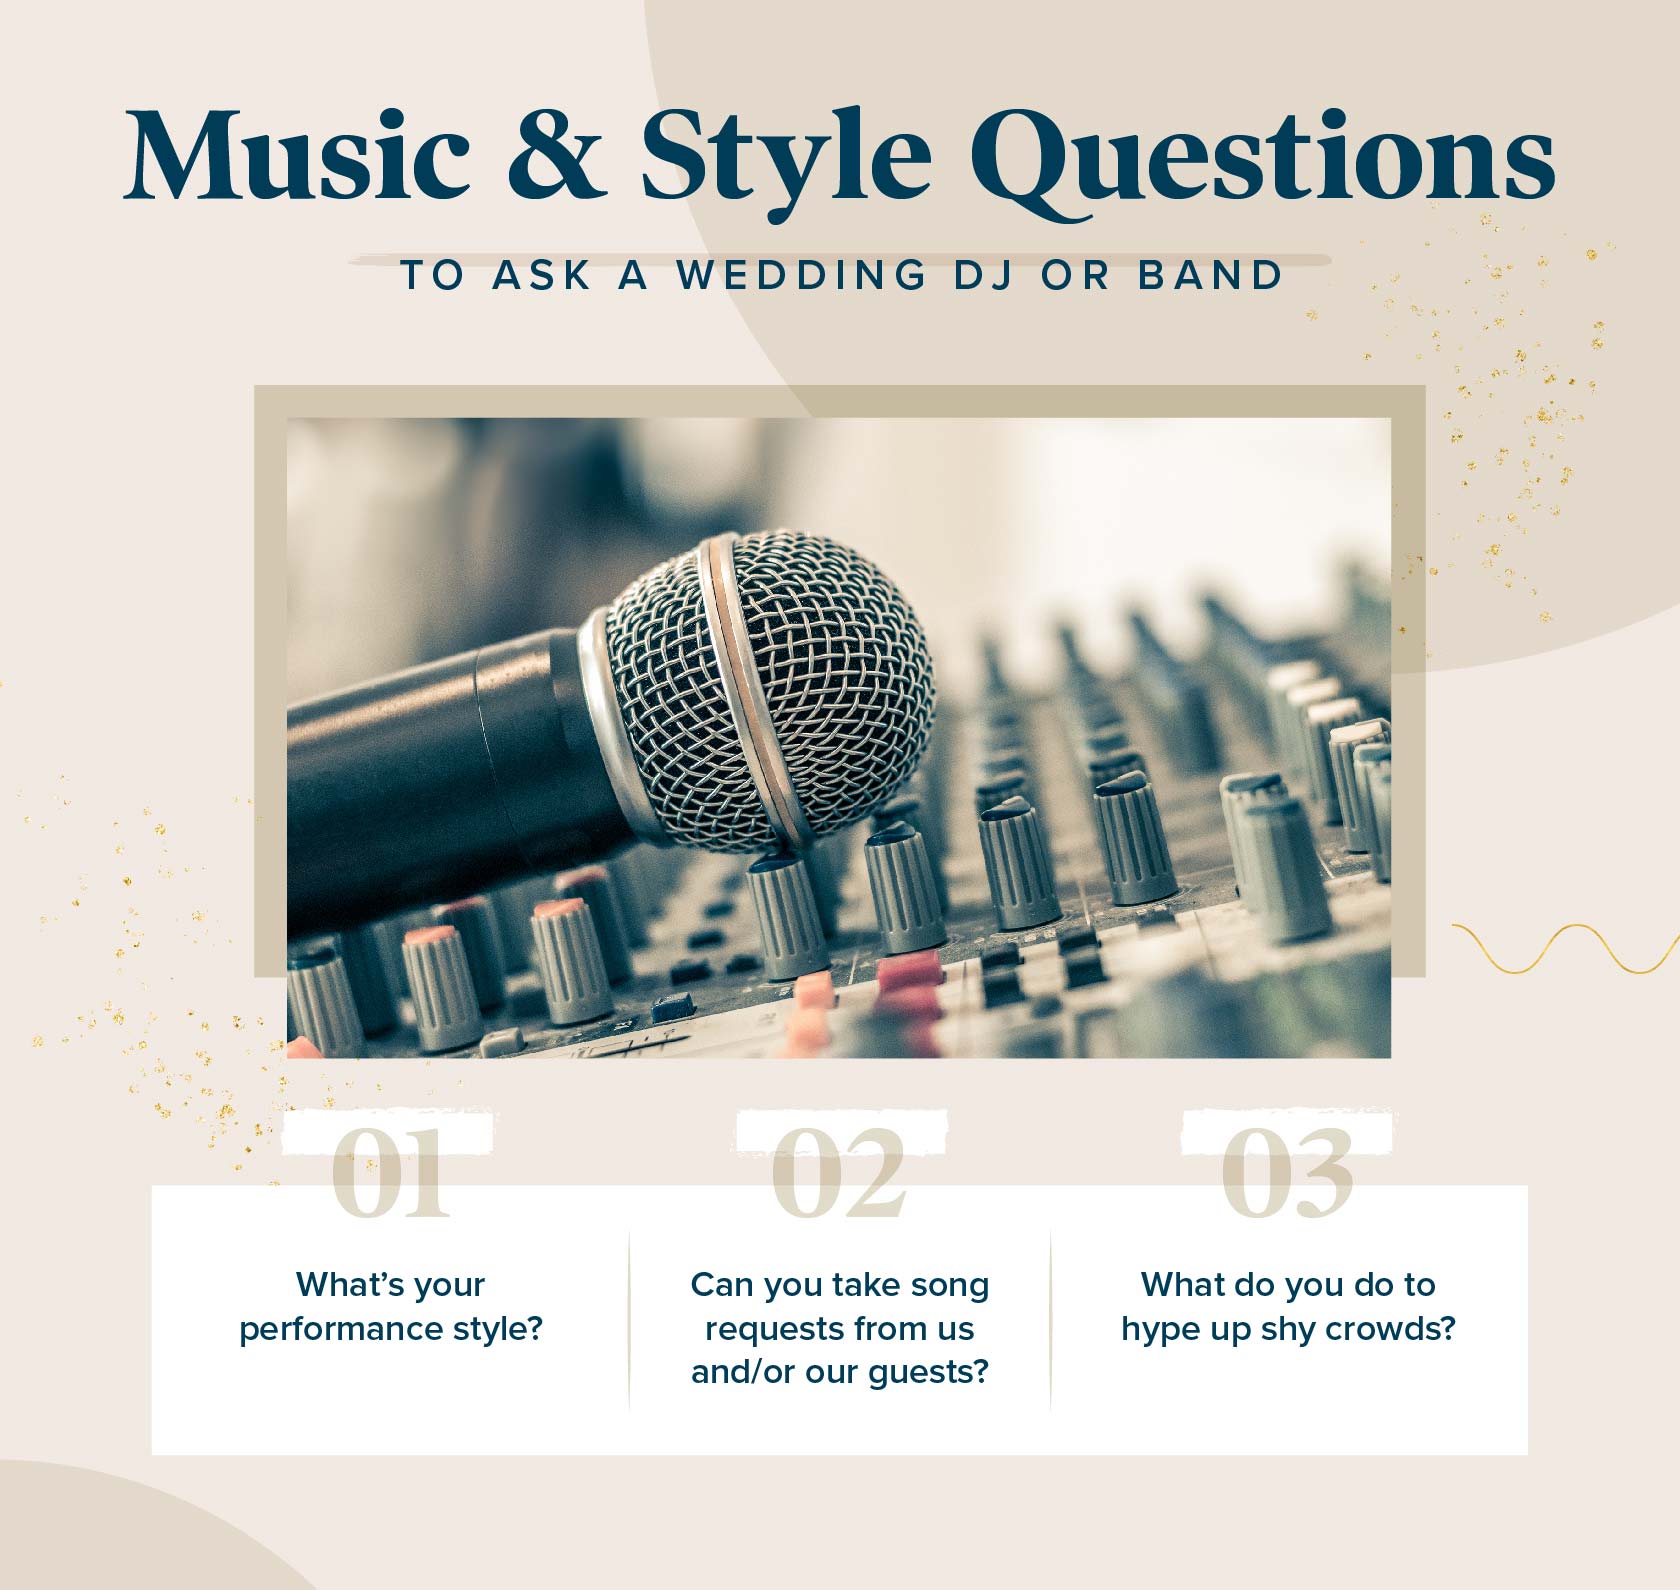 music-style-questions-to-ask-wedding-dj-or-band